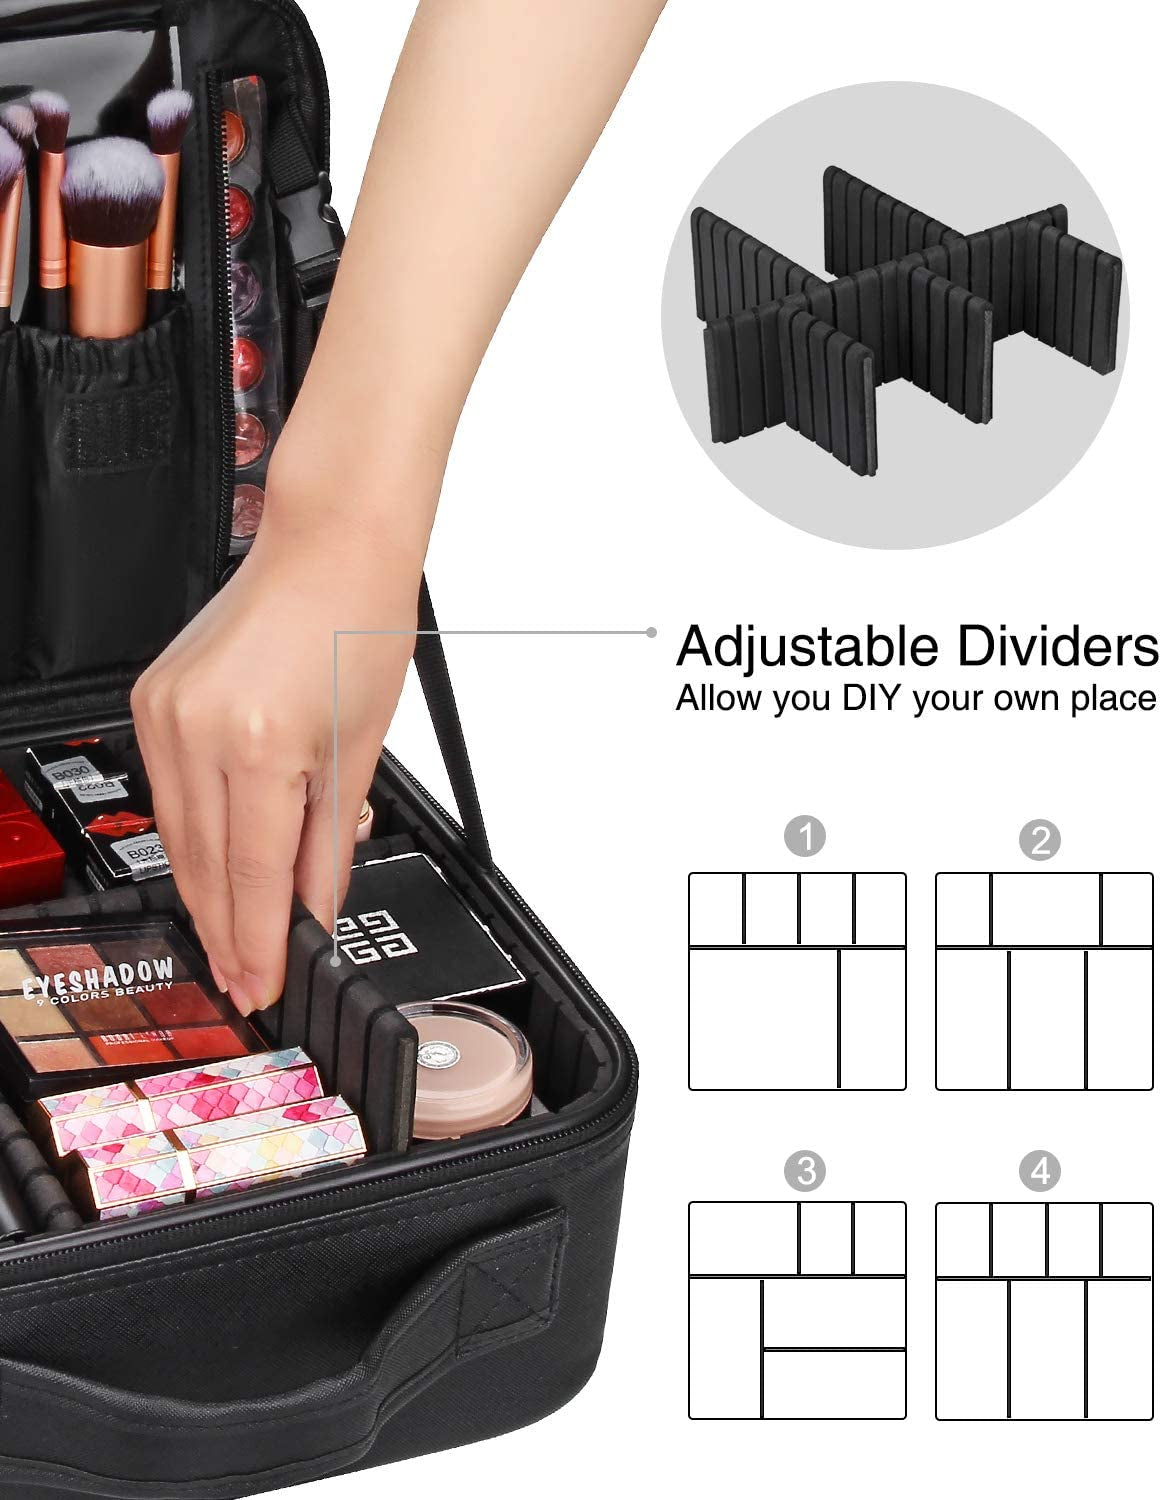 Relavel Makeup Organizer Bag, Makeup Case Leather Travel Makeup Bag 2 Layers Train Case Large Cosmetic Case Portable with Adjustable Dividers Makeup Brushes Holder Storage Box (Small Black)